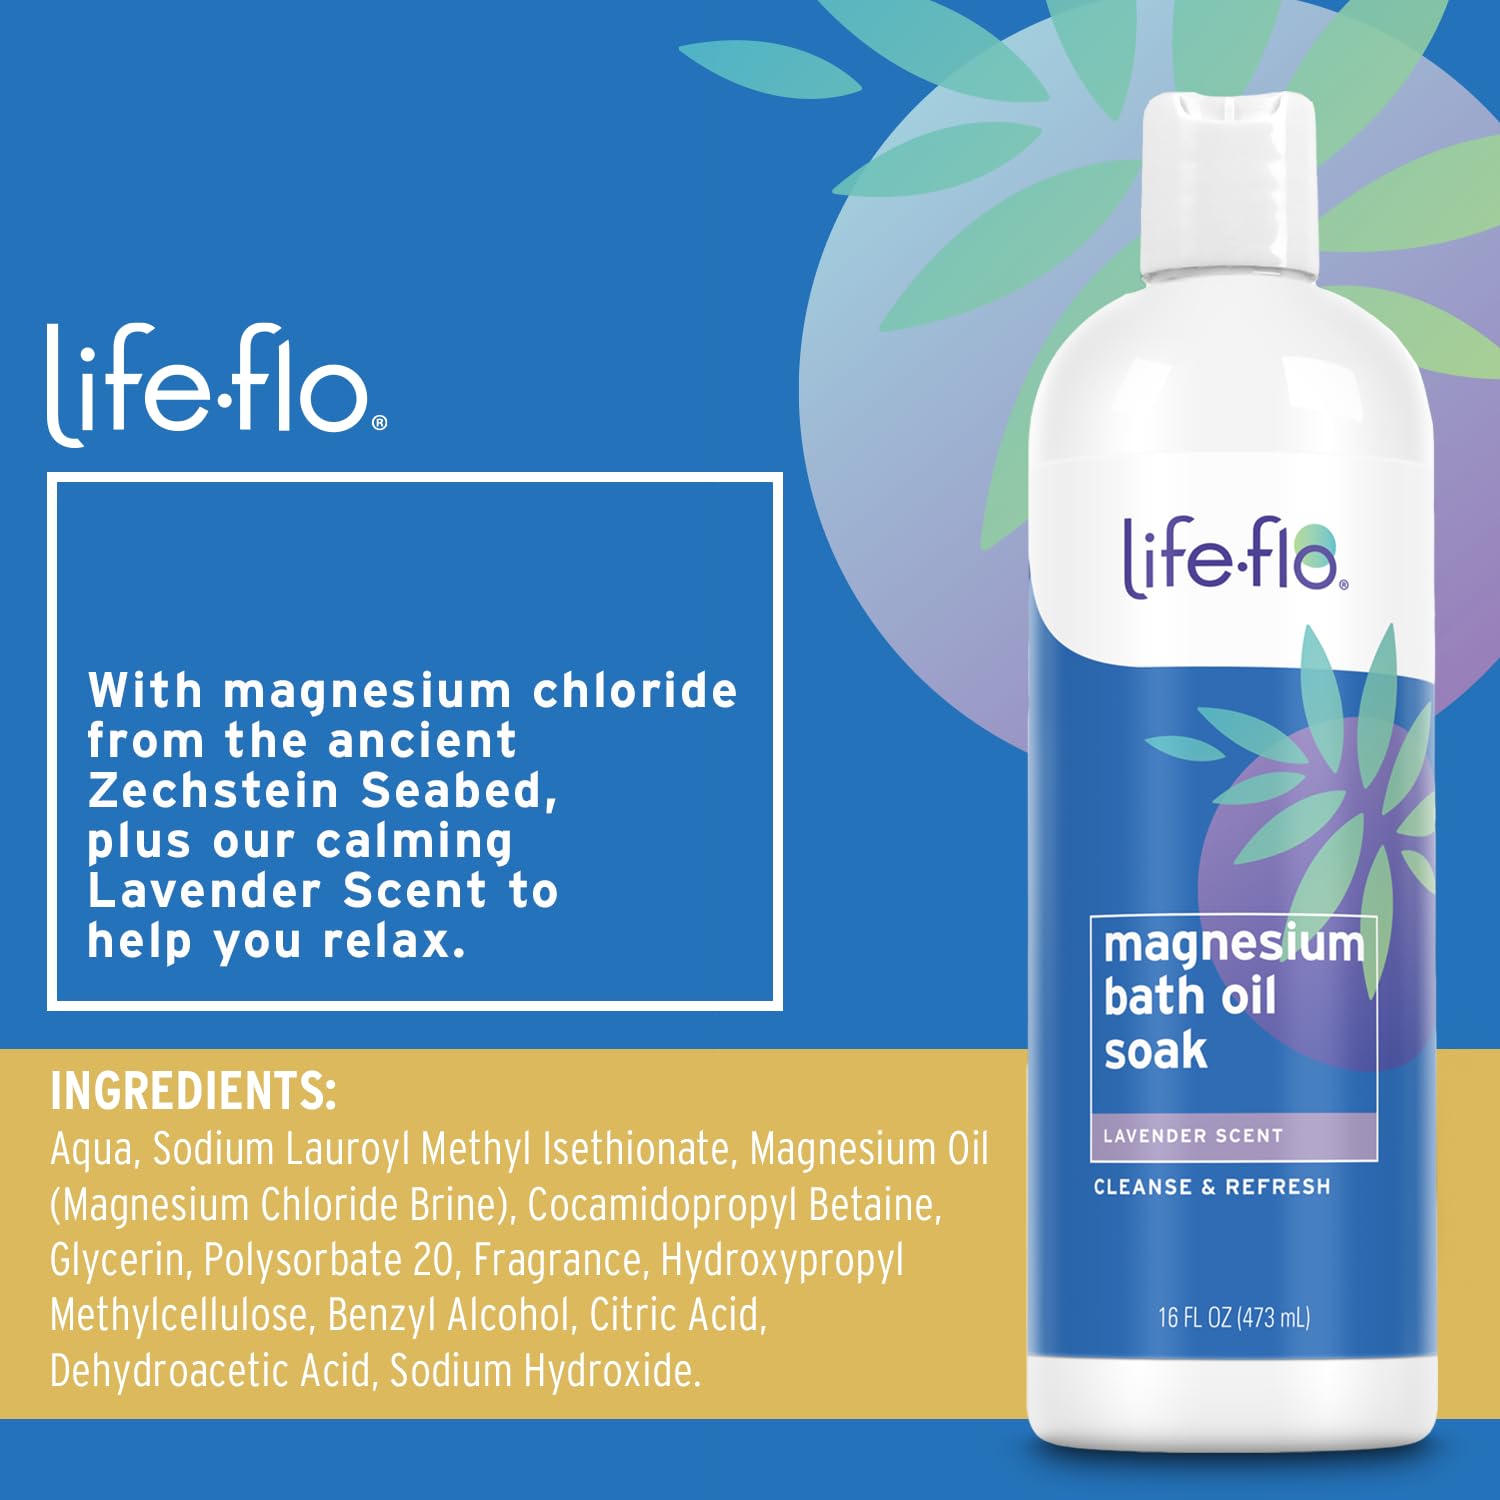 Life-flo Magnesium Oil Bath Soak Lavender Scent, Plus Magnesium Chloride from Zechstein Seabed, Cleanses and Refreshes, Relaxes Muscles and Joints, 60-Day Guarantee, Not Tested on Animals, 16oz